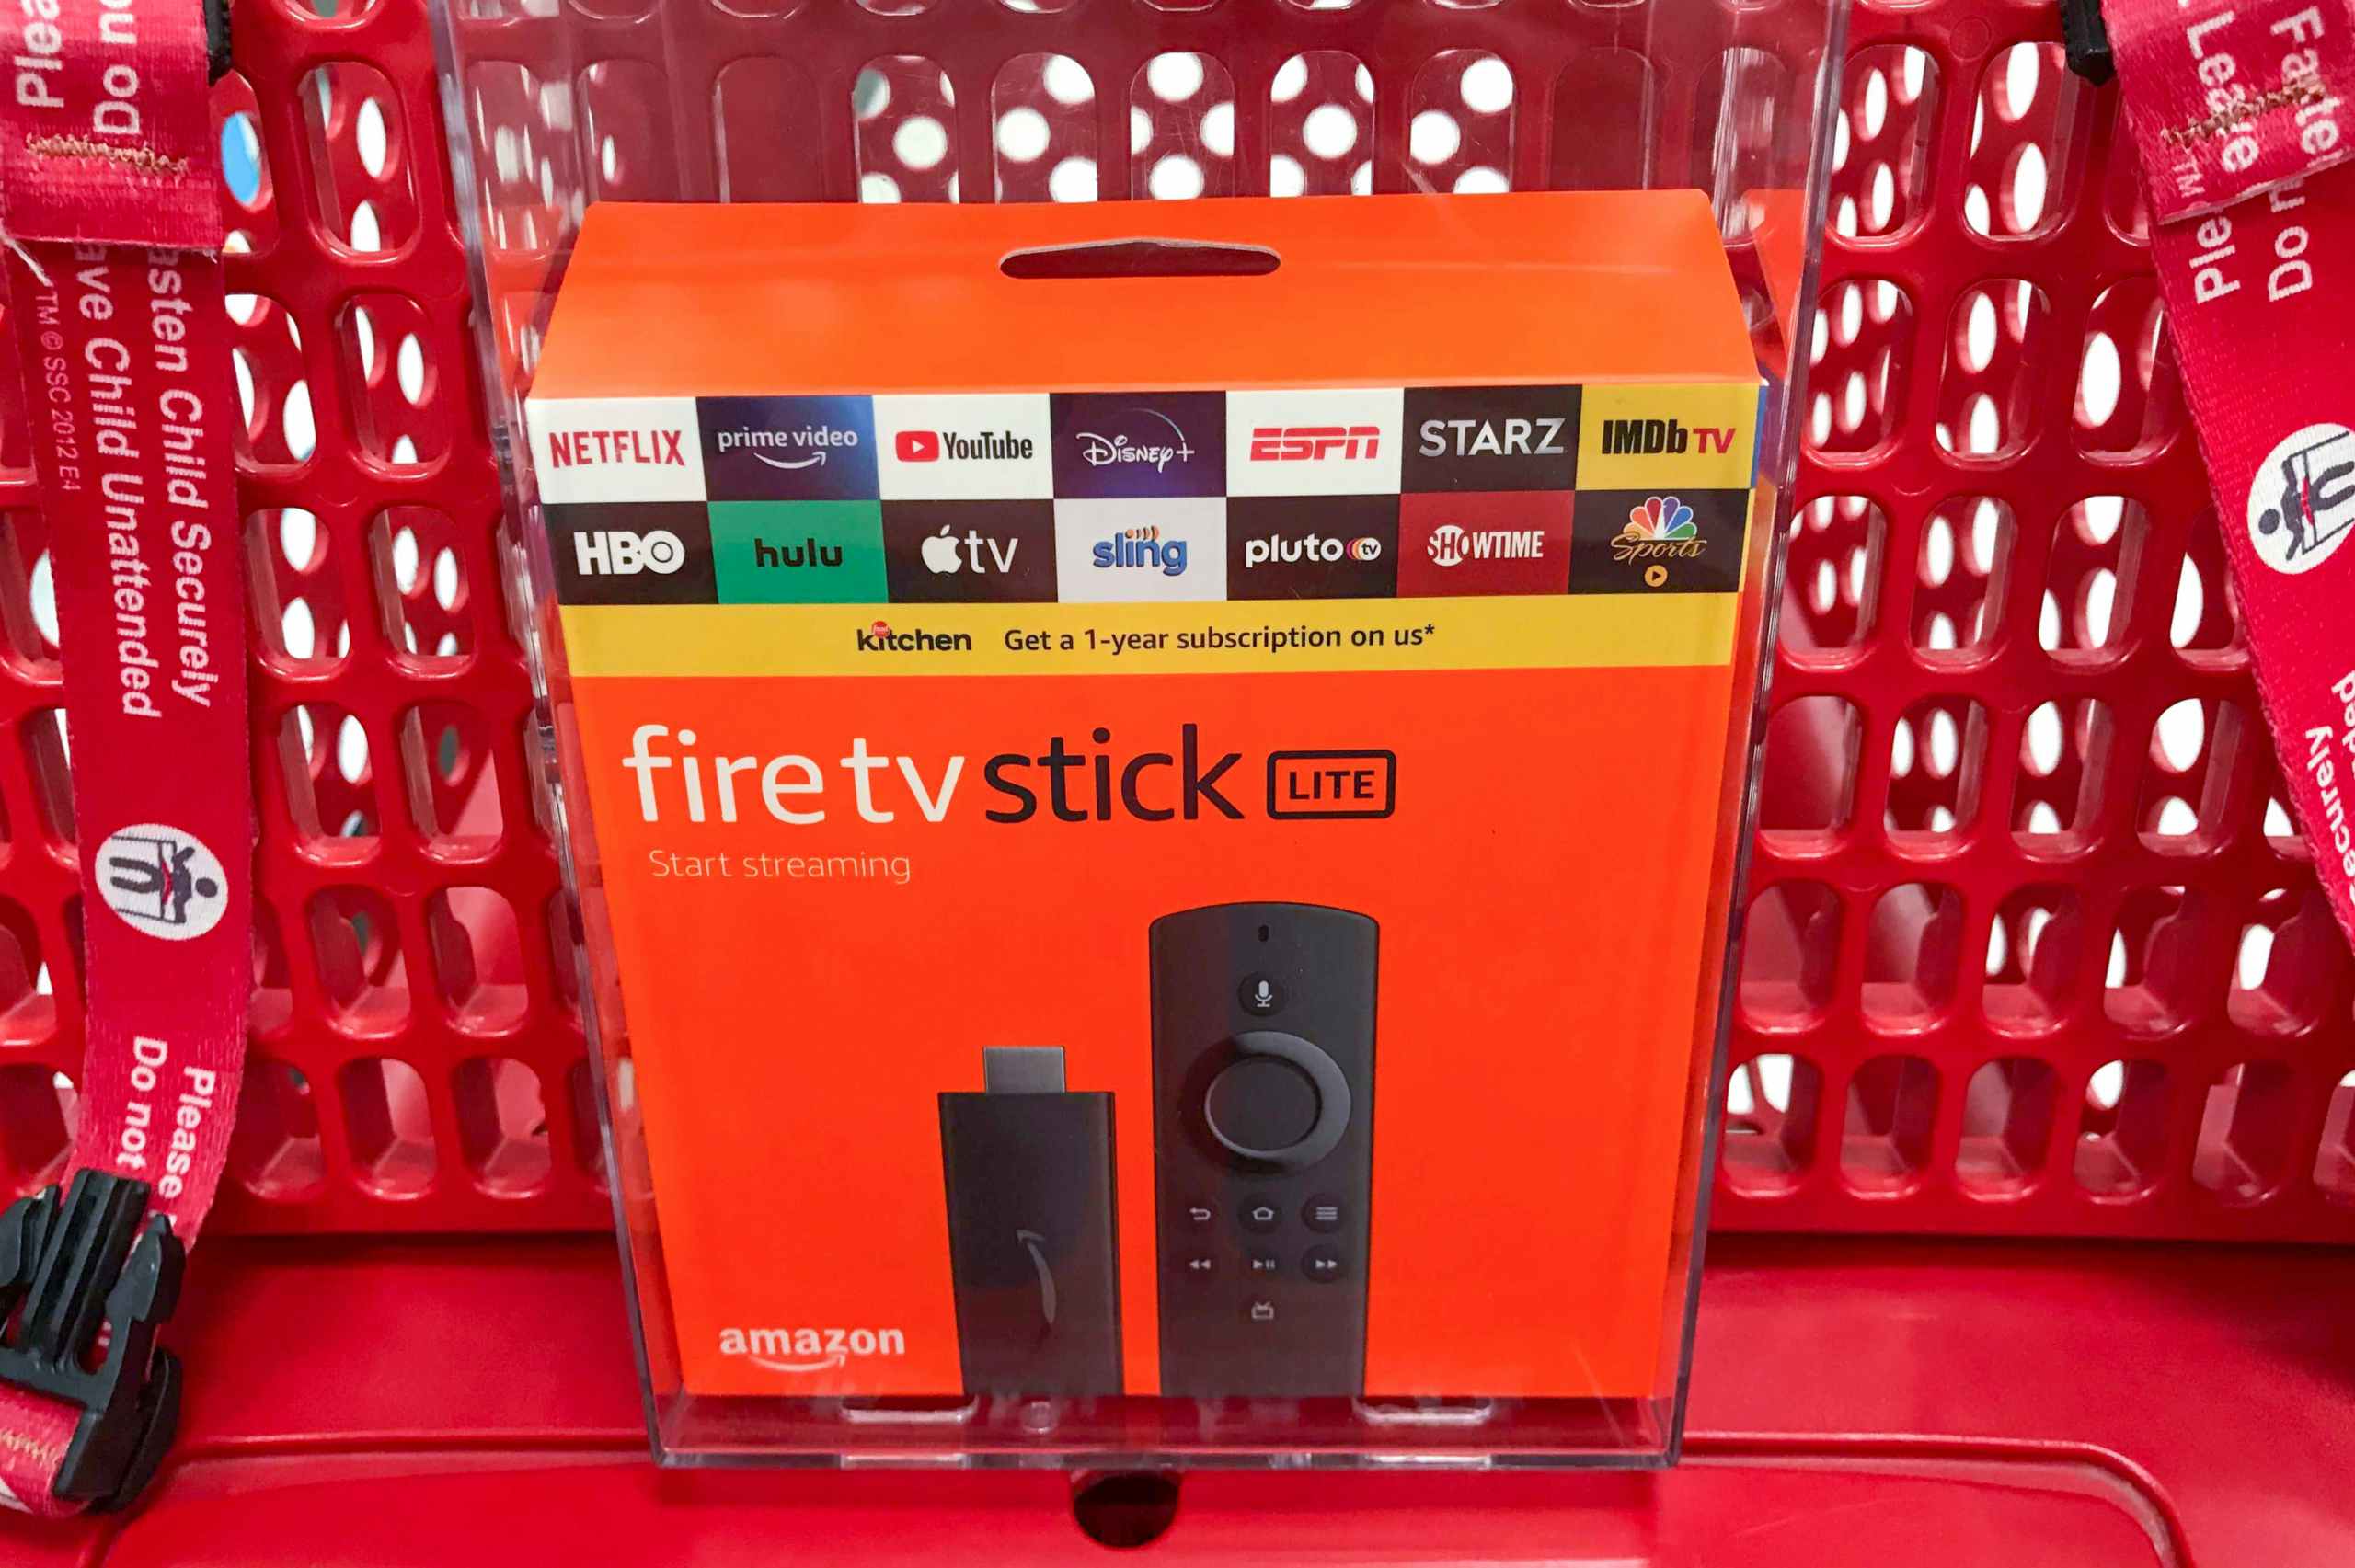 Amazon fire stick in Target shopping cart